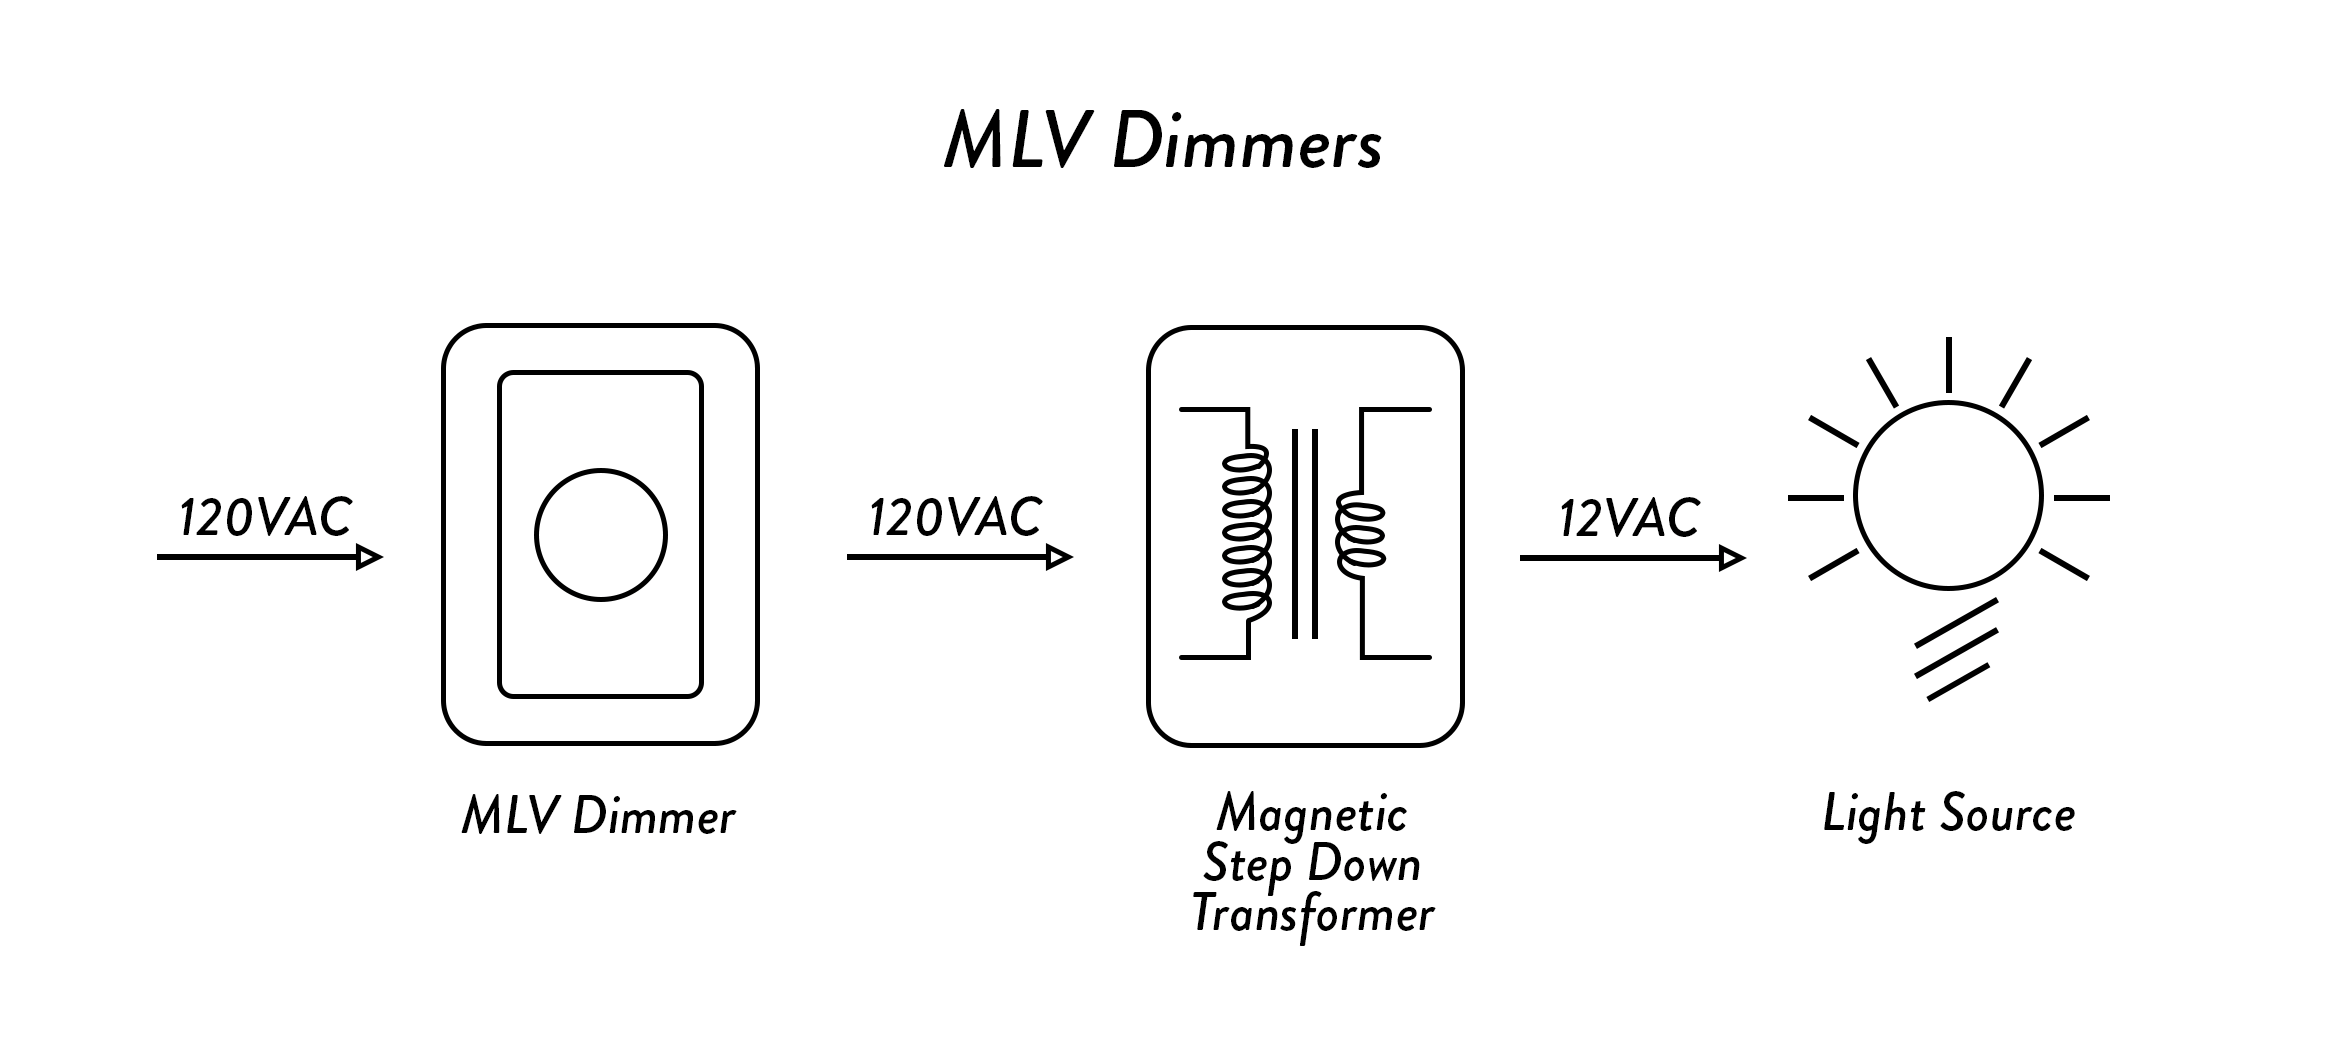 mlv dimmers